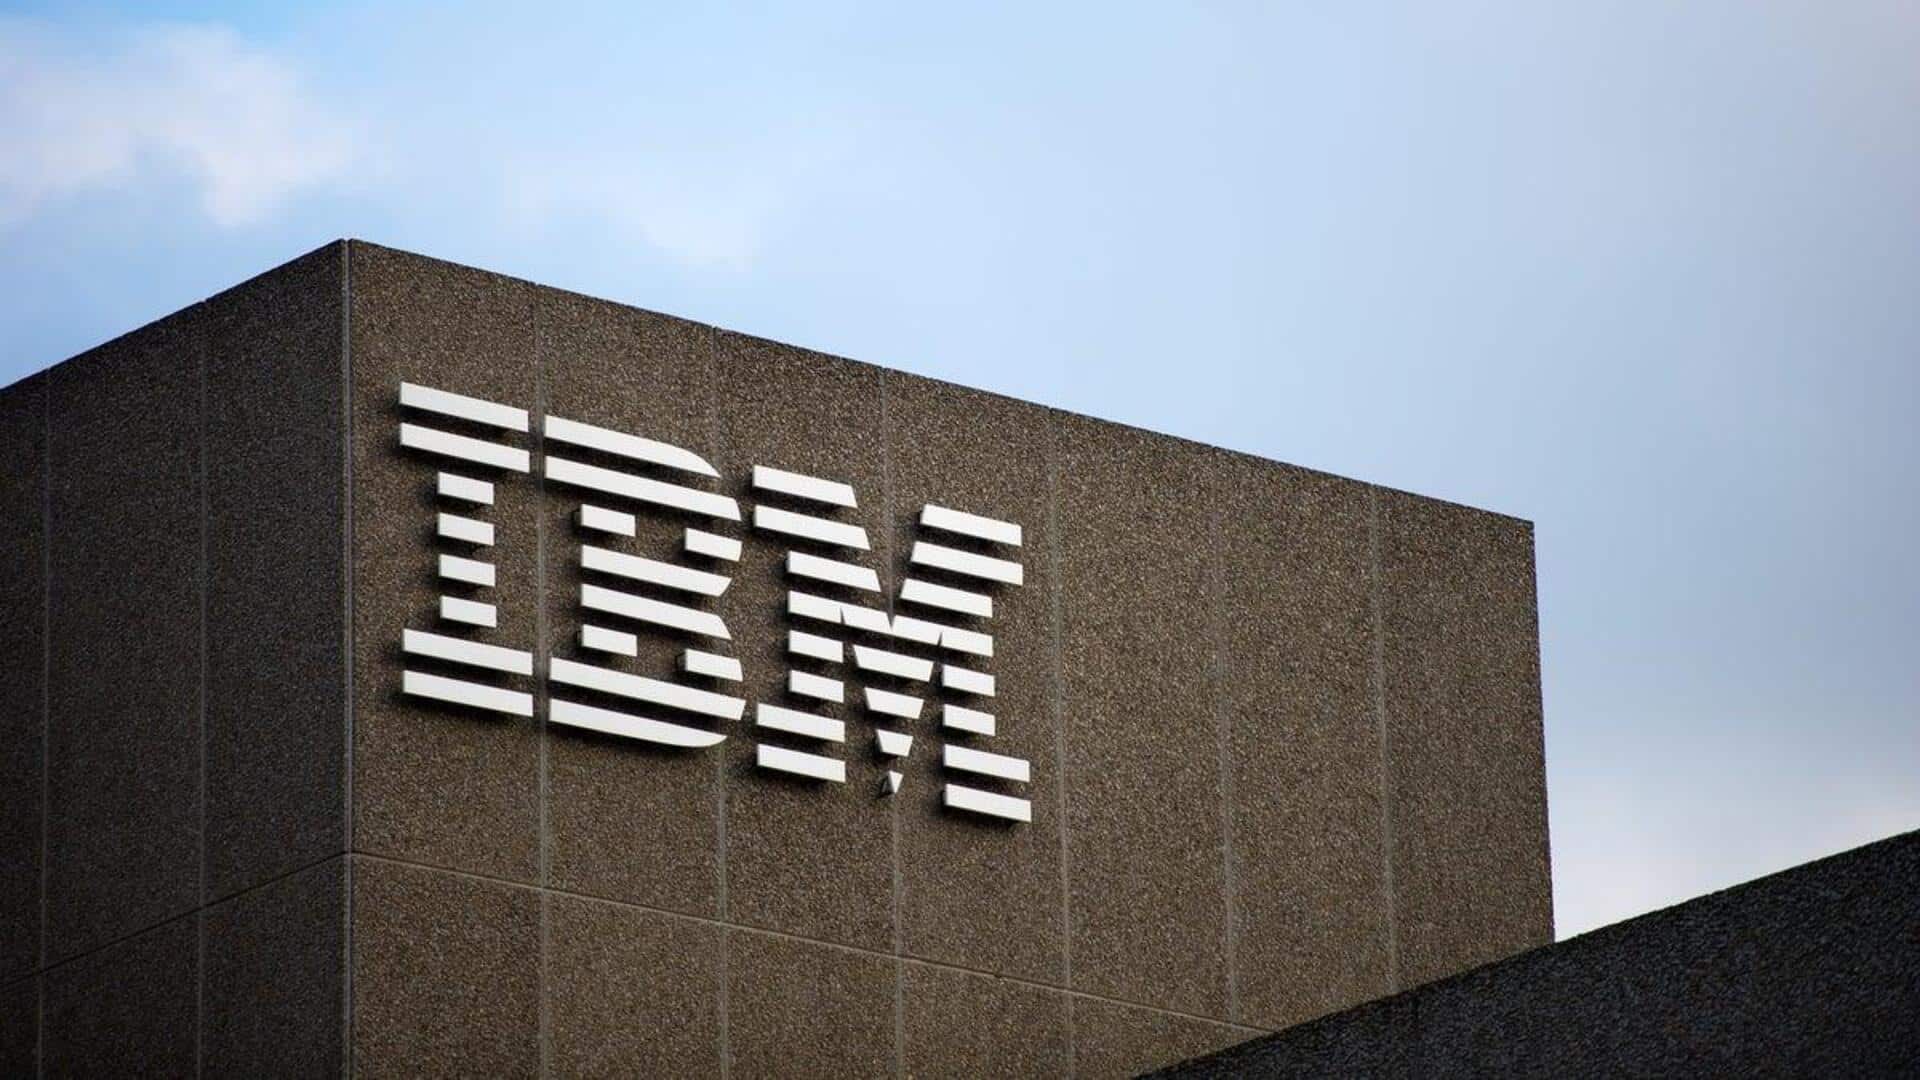 Move close to office or leave: IBM's ultimatum to managers